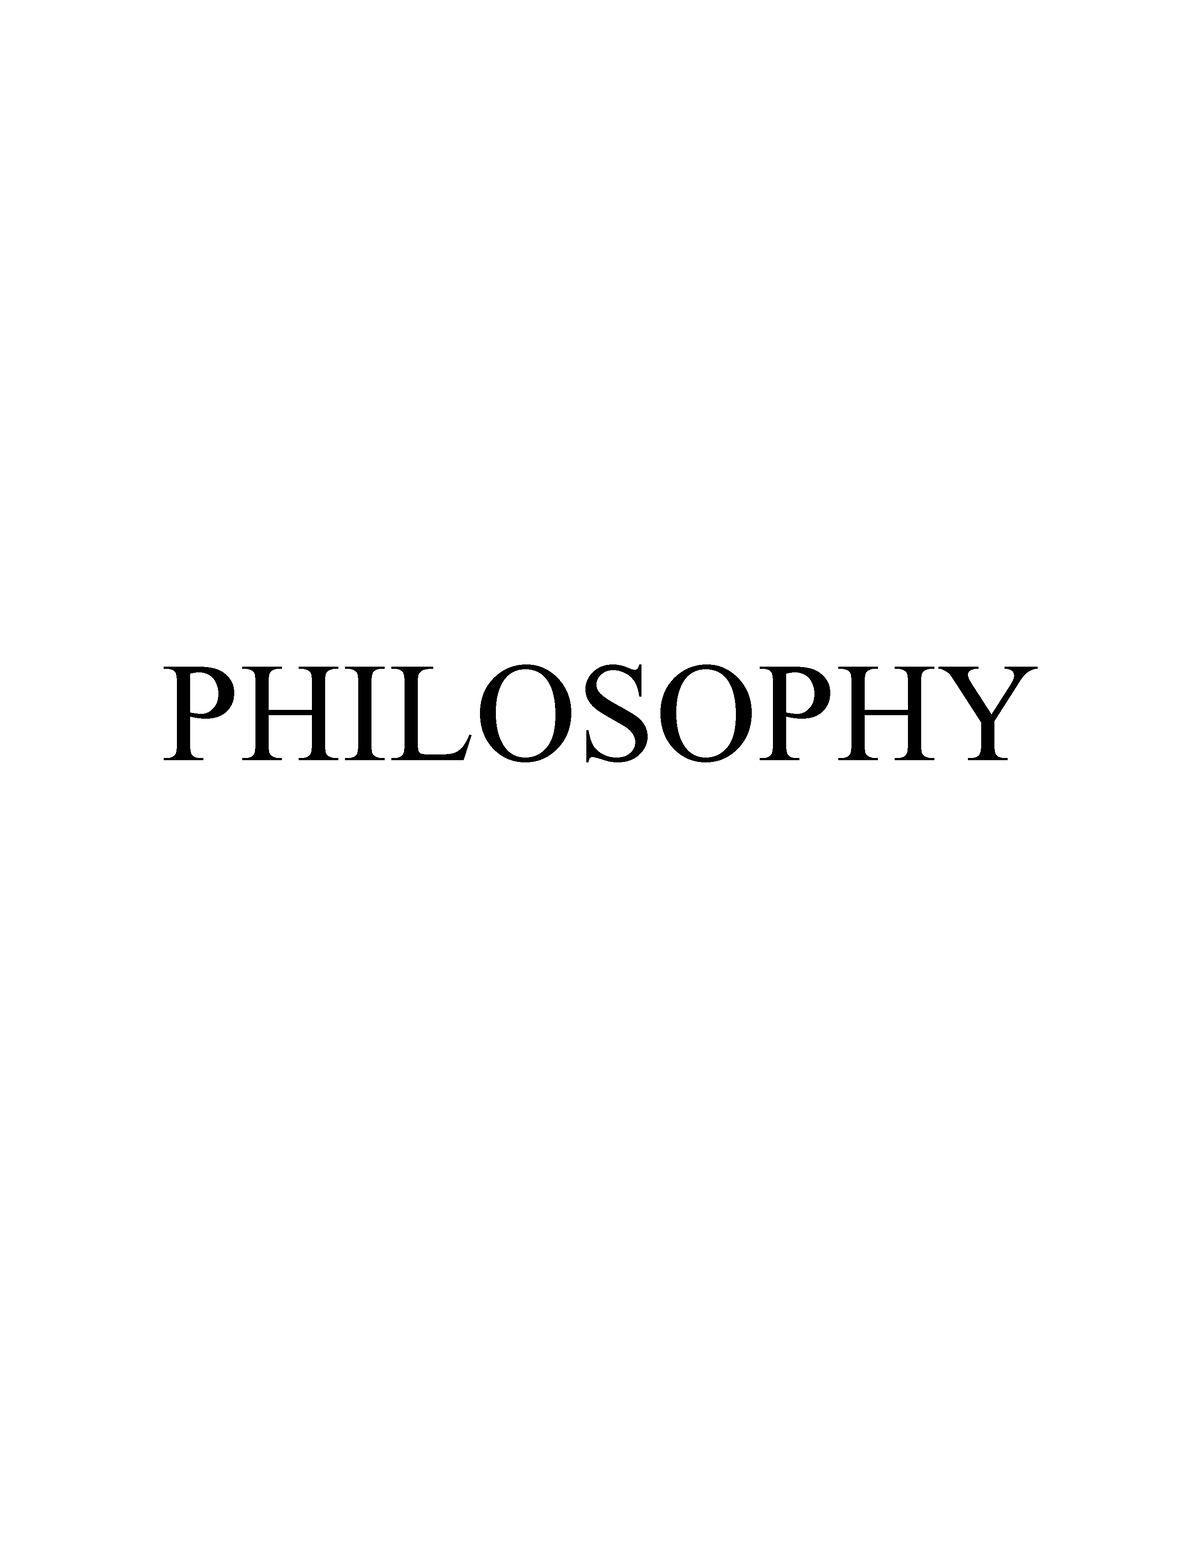 Philosophy - Vbkigvbbj - PHILOSOPHY Sartre claimed that “Man is what he ...